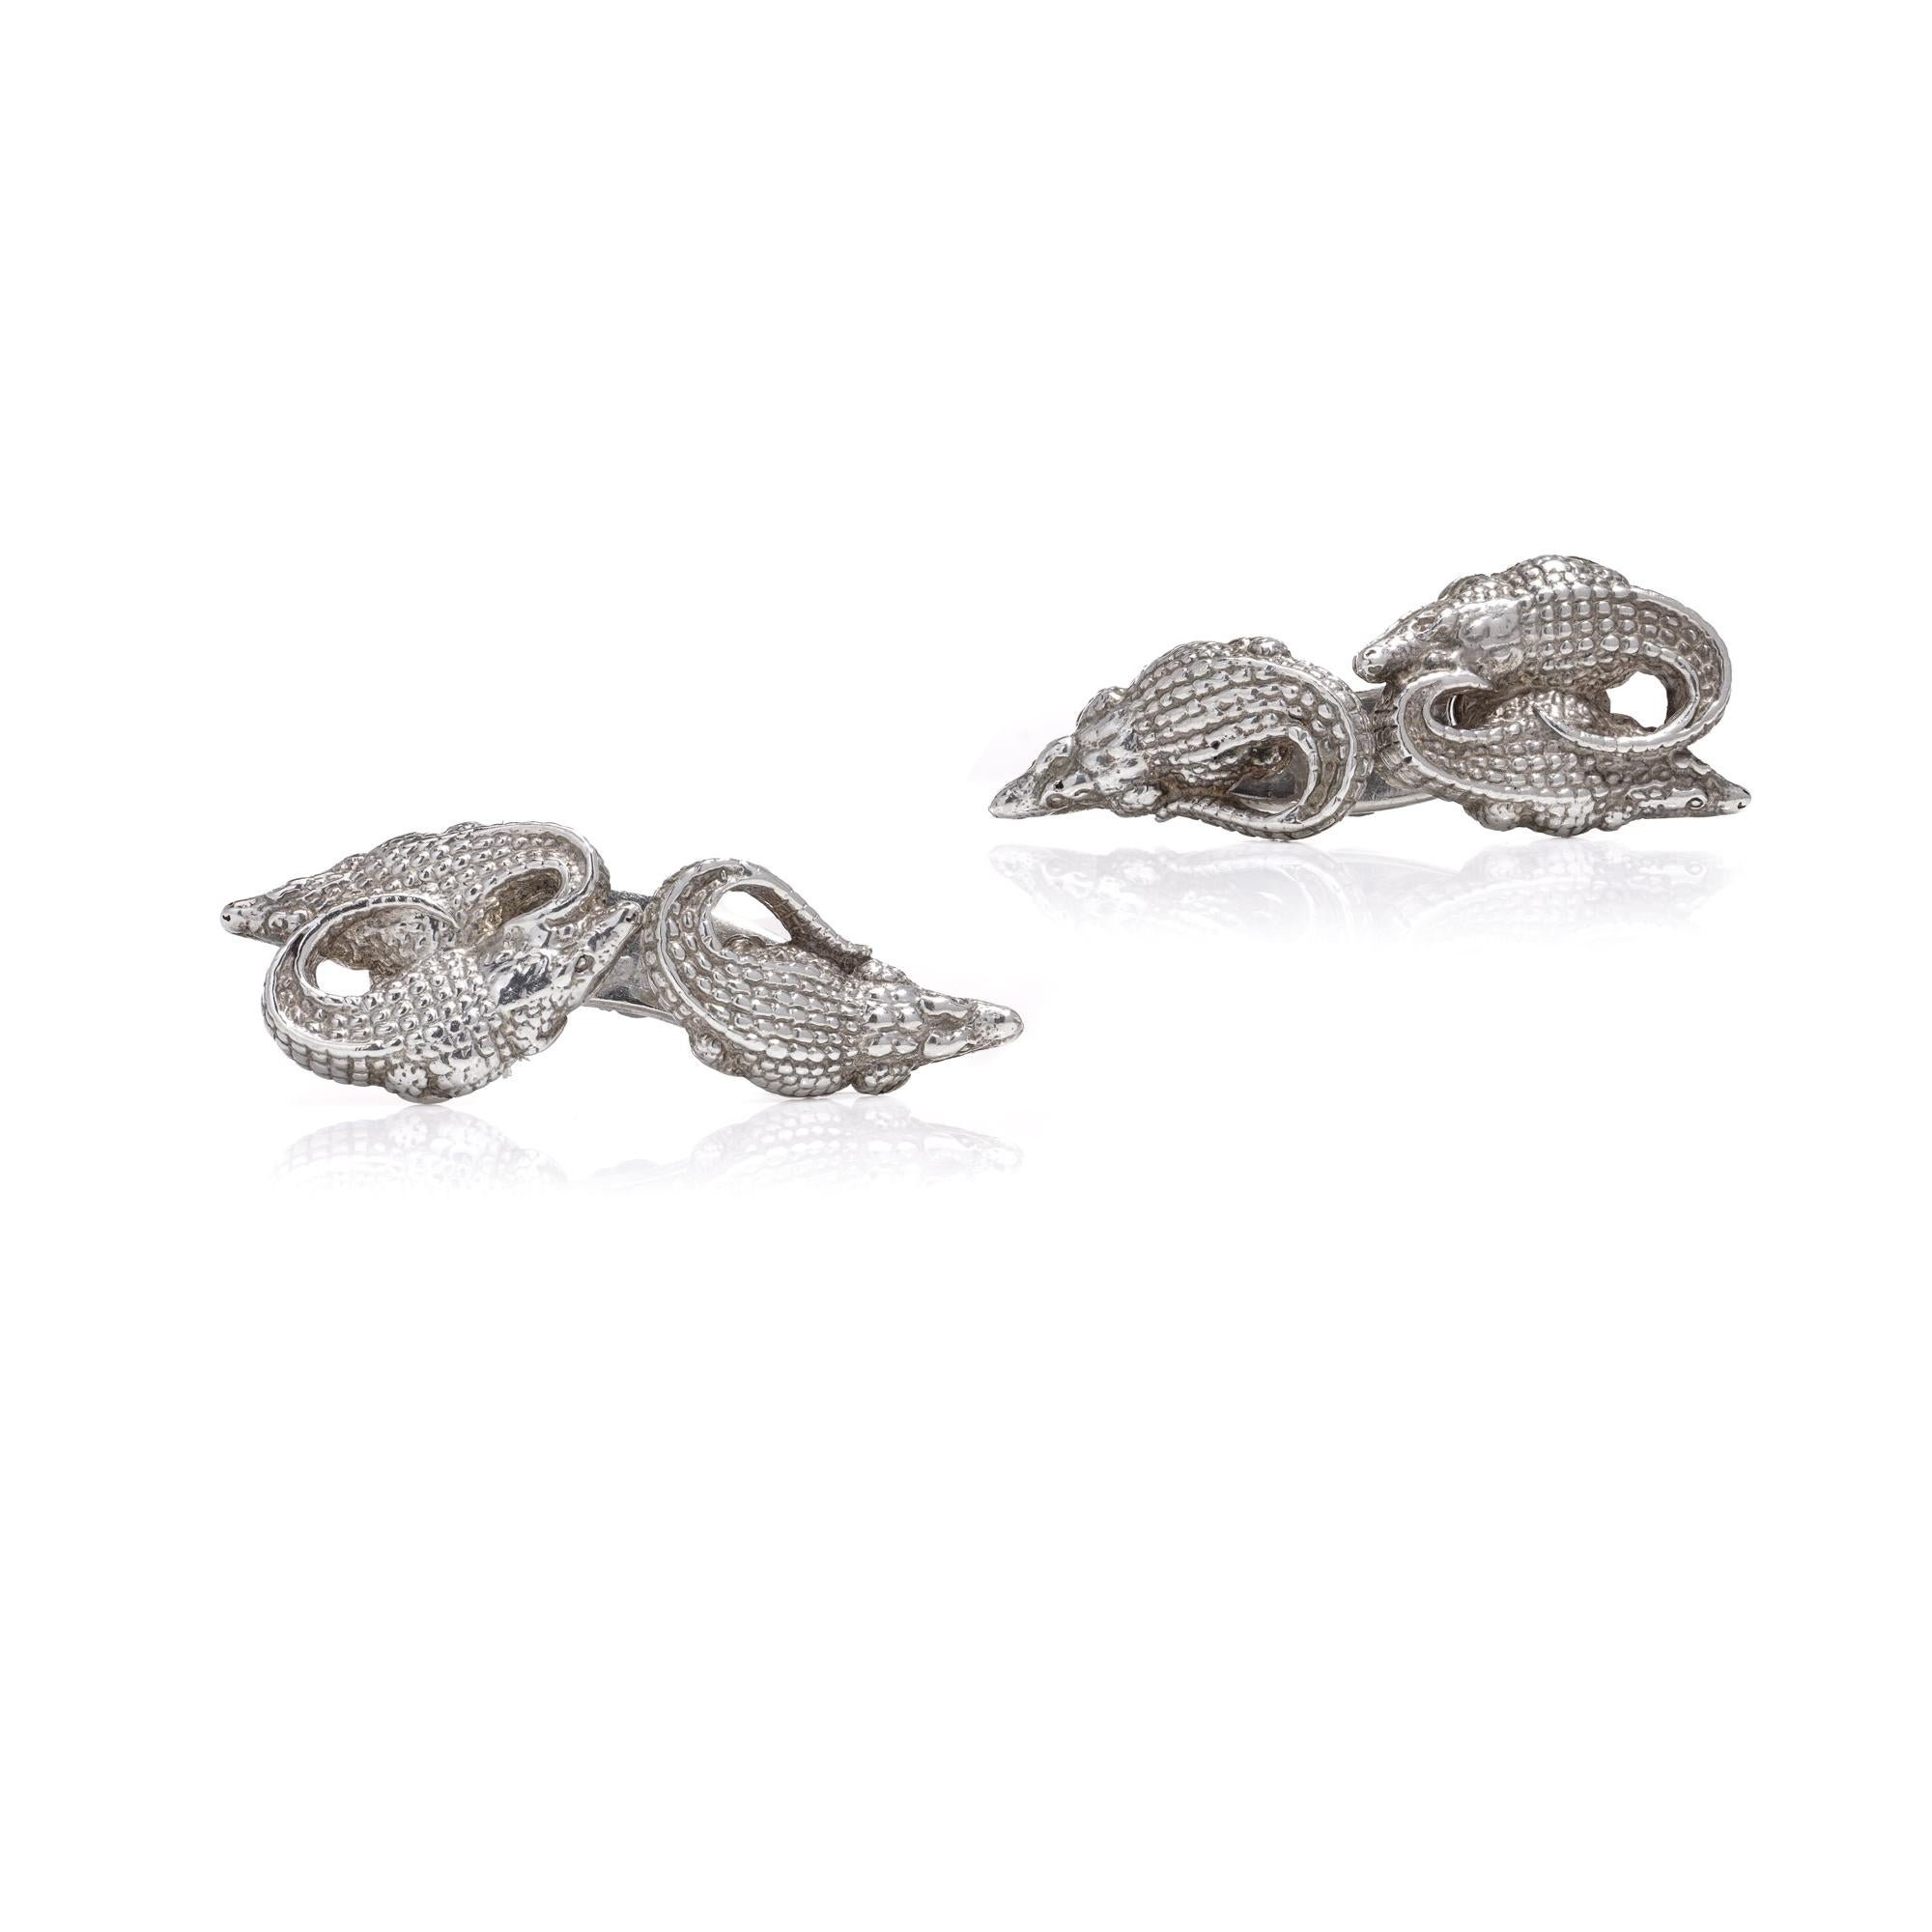 Step into the realm of luxury and adventure with the Patrick Mavros Silver Nile Crocodile Cufflinks. Inspired by the majestic Nile crocodiles, these cufflinks are a tribute to one of Africa's most iconic and formidable creatures.

Crafted from solid